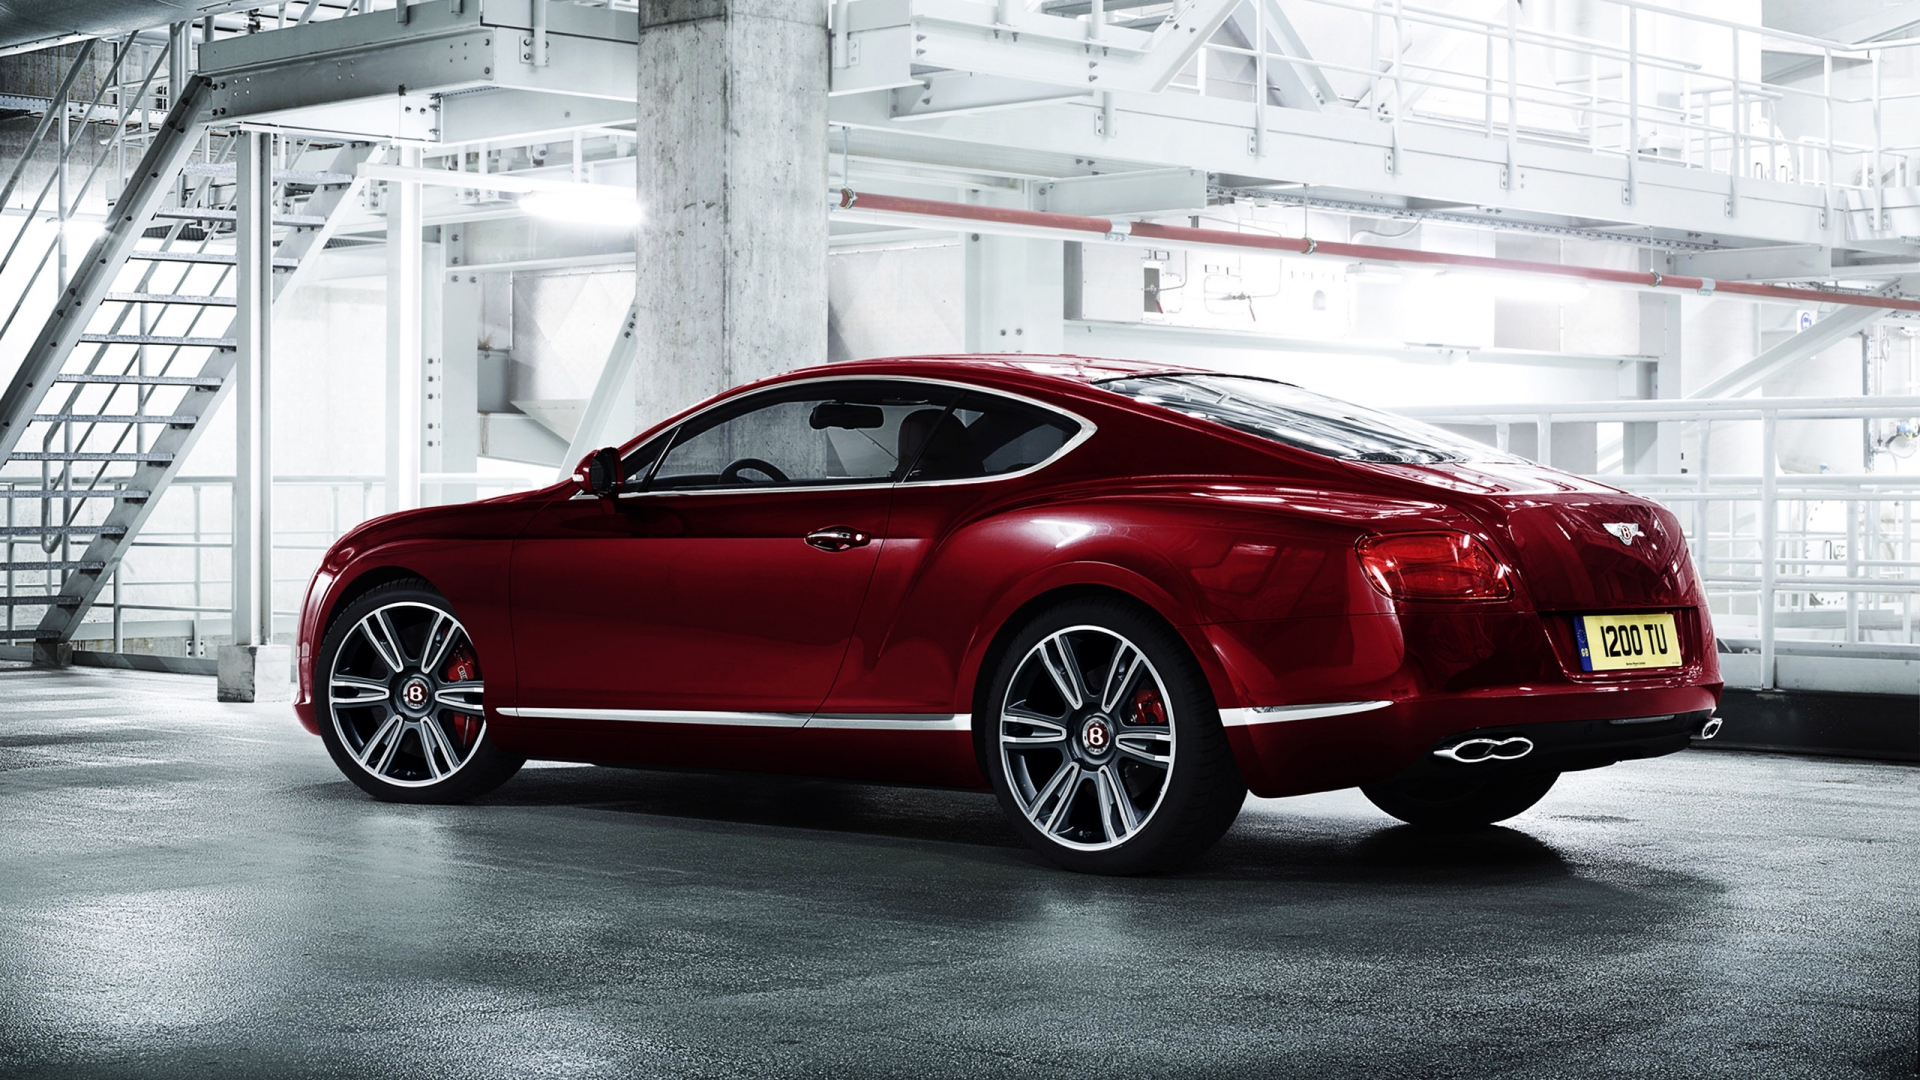 Bentley Continental V8 Side View for 1920 x 1080 HDTV 1080p resolution